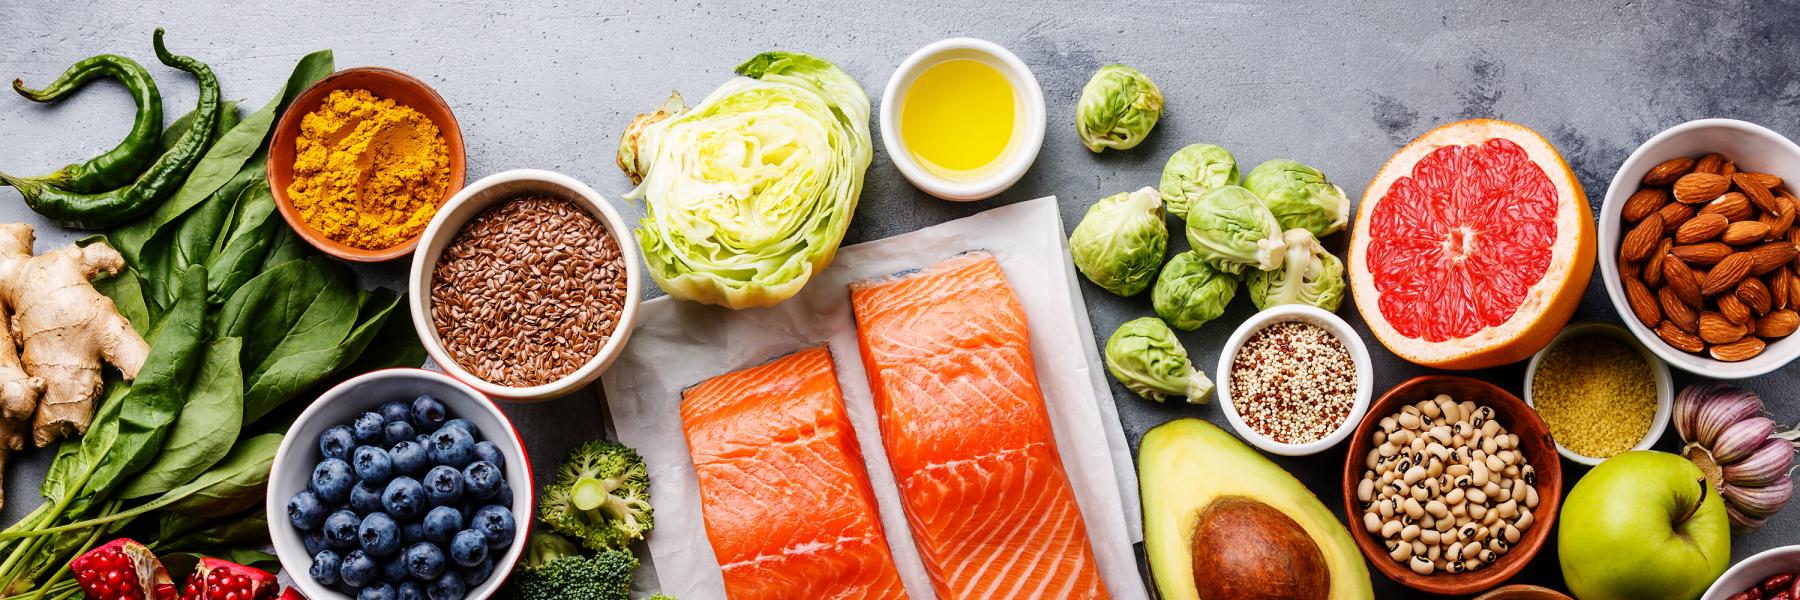 Food choices for endo diet including fish and omega 3